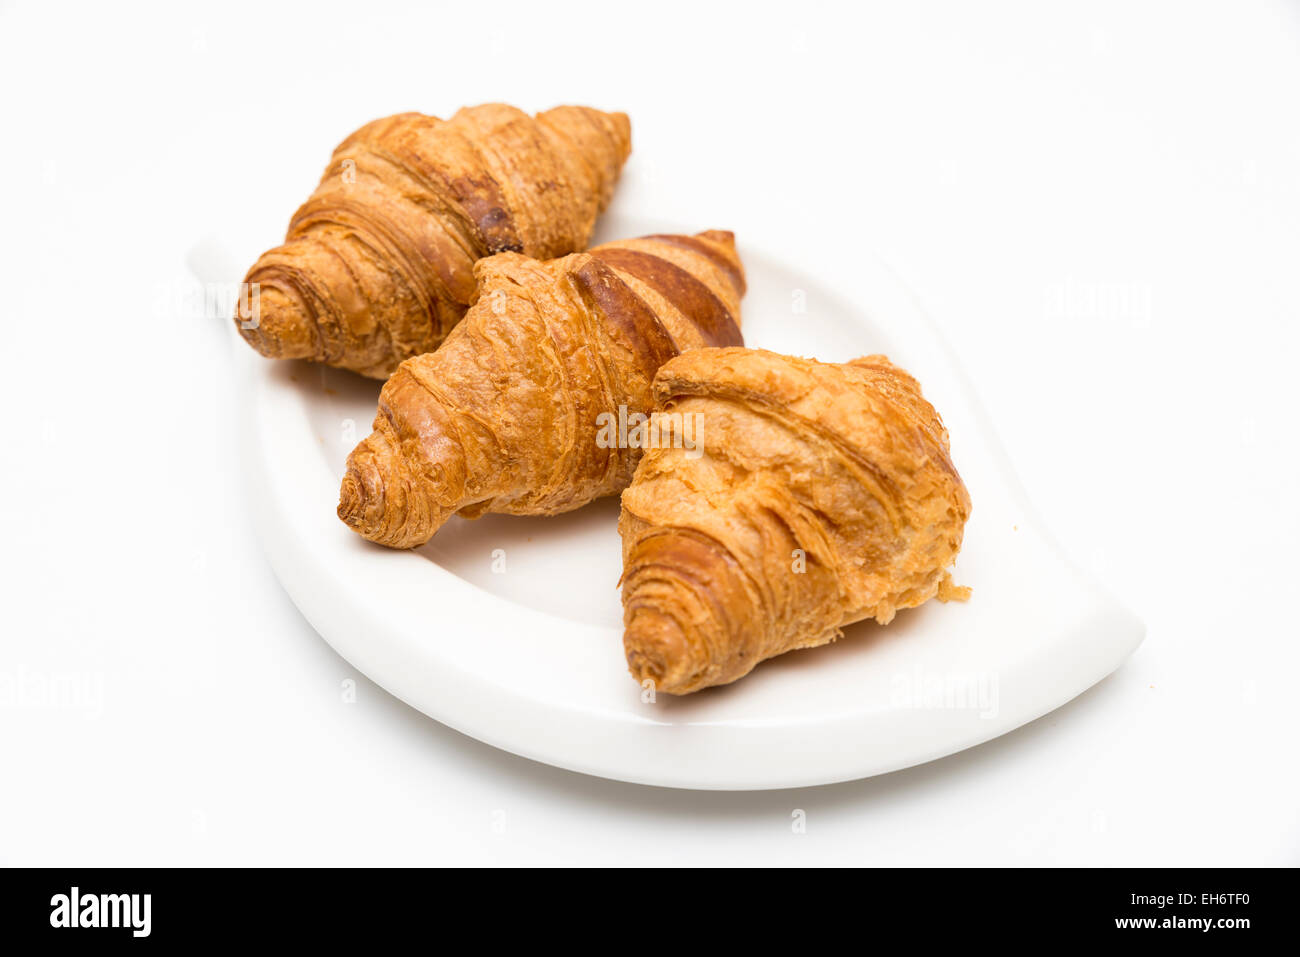 croissant on a white background Stock Photo